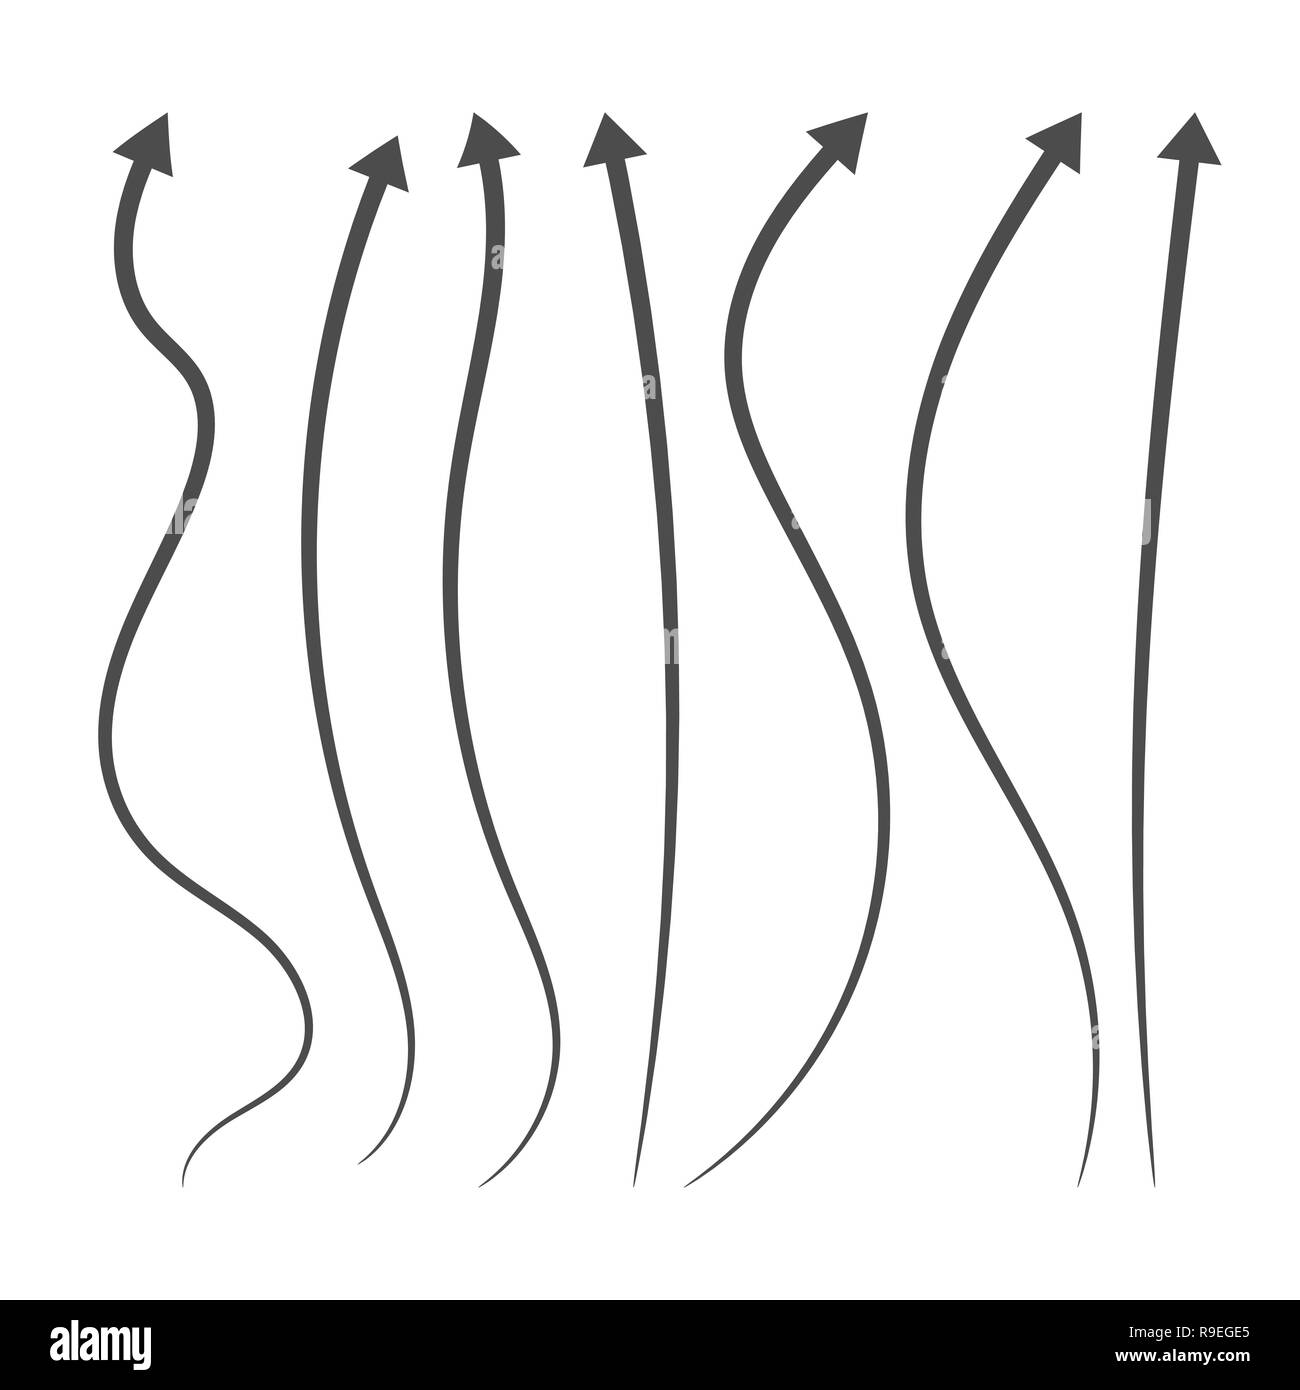 Set of hand drawn arrows. Vector illustration. Grunge sketch of arrows isolated Stock Vector